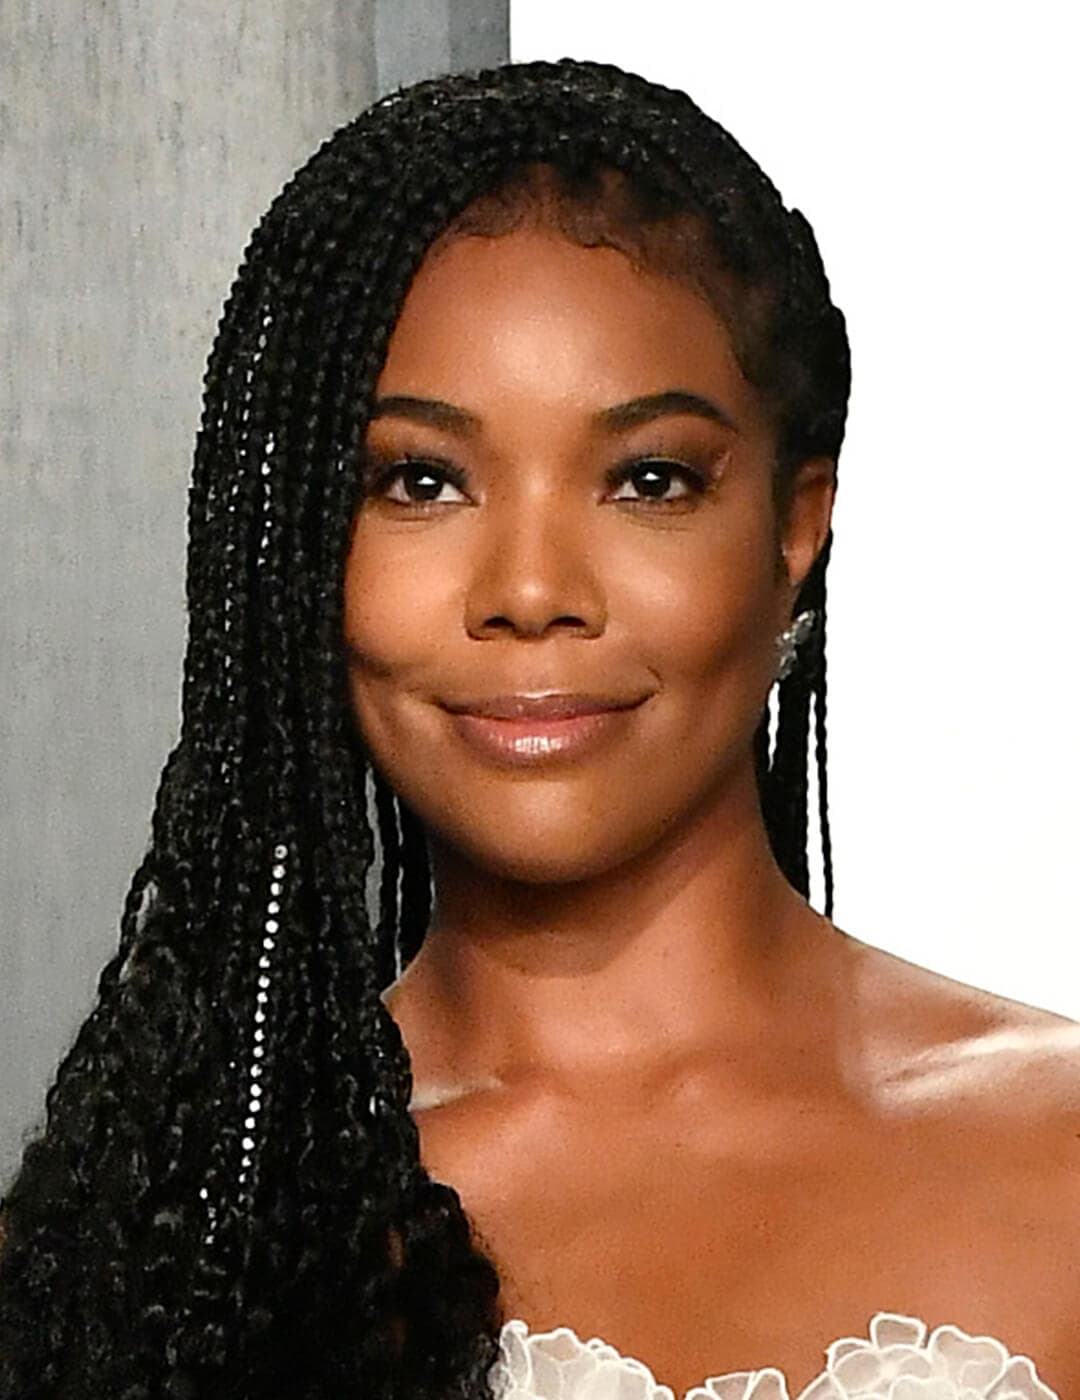 Gabrielle Union looking glam in a braided hairstyle and natural makeup look